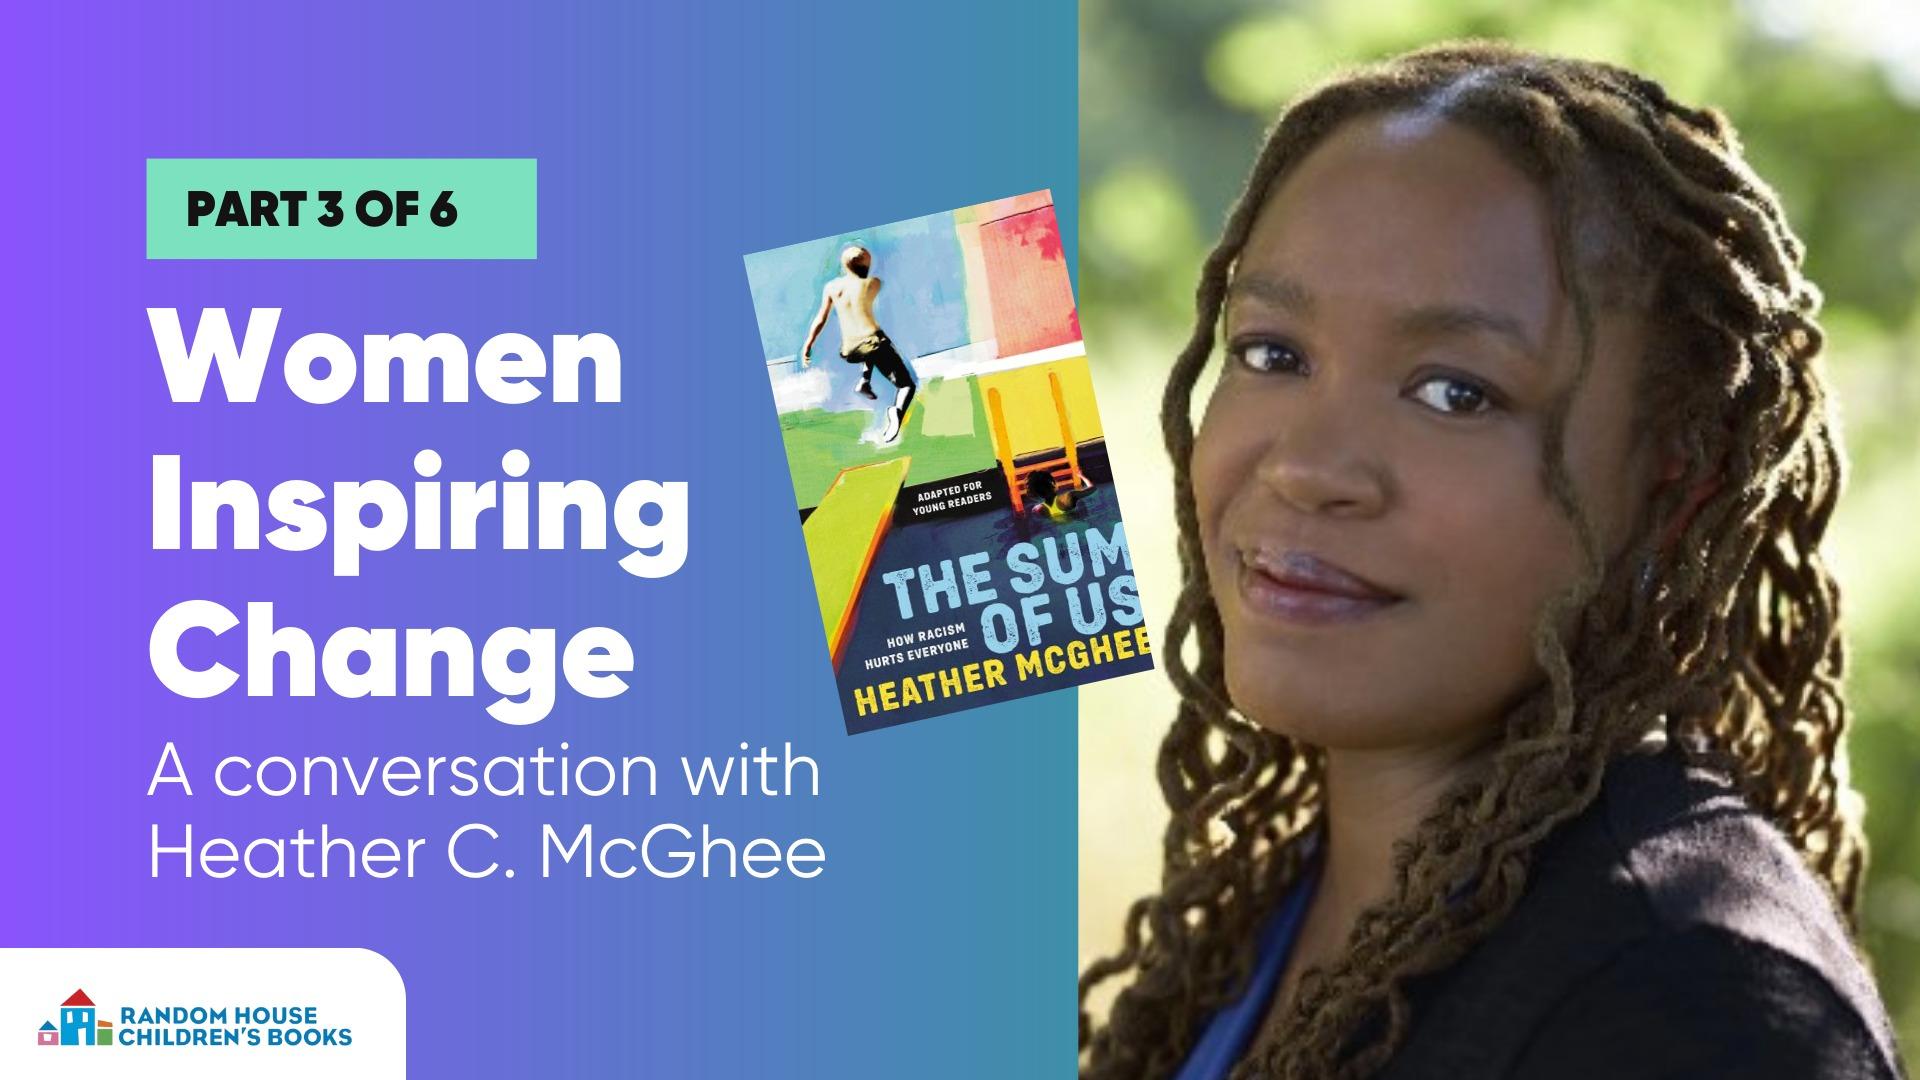 A conversation with Heather C. McGhee -Part 3 of 6